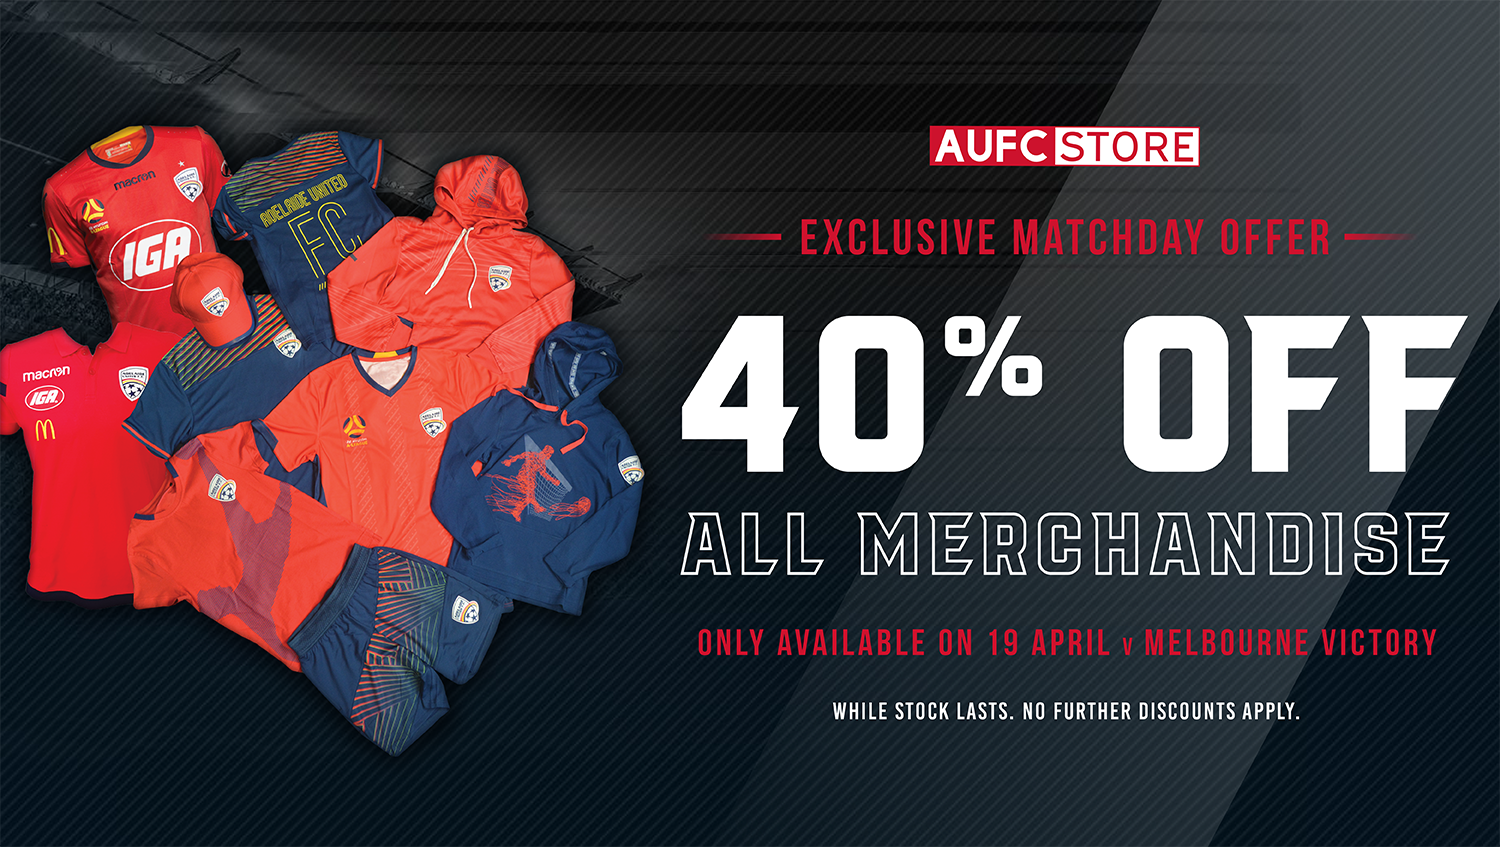 Adelaide United 40% off all merchandise - Adelaide United vs Melbourne Victory only